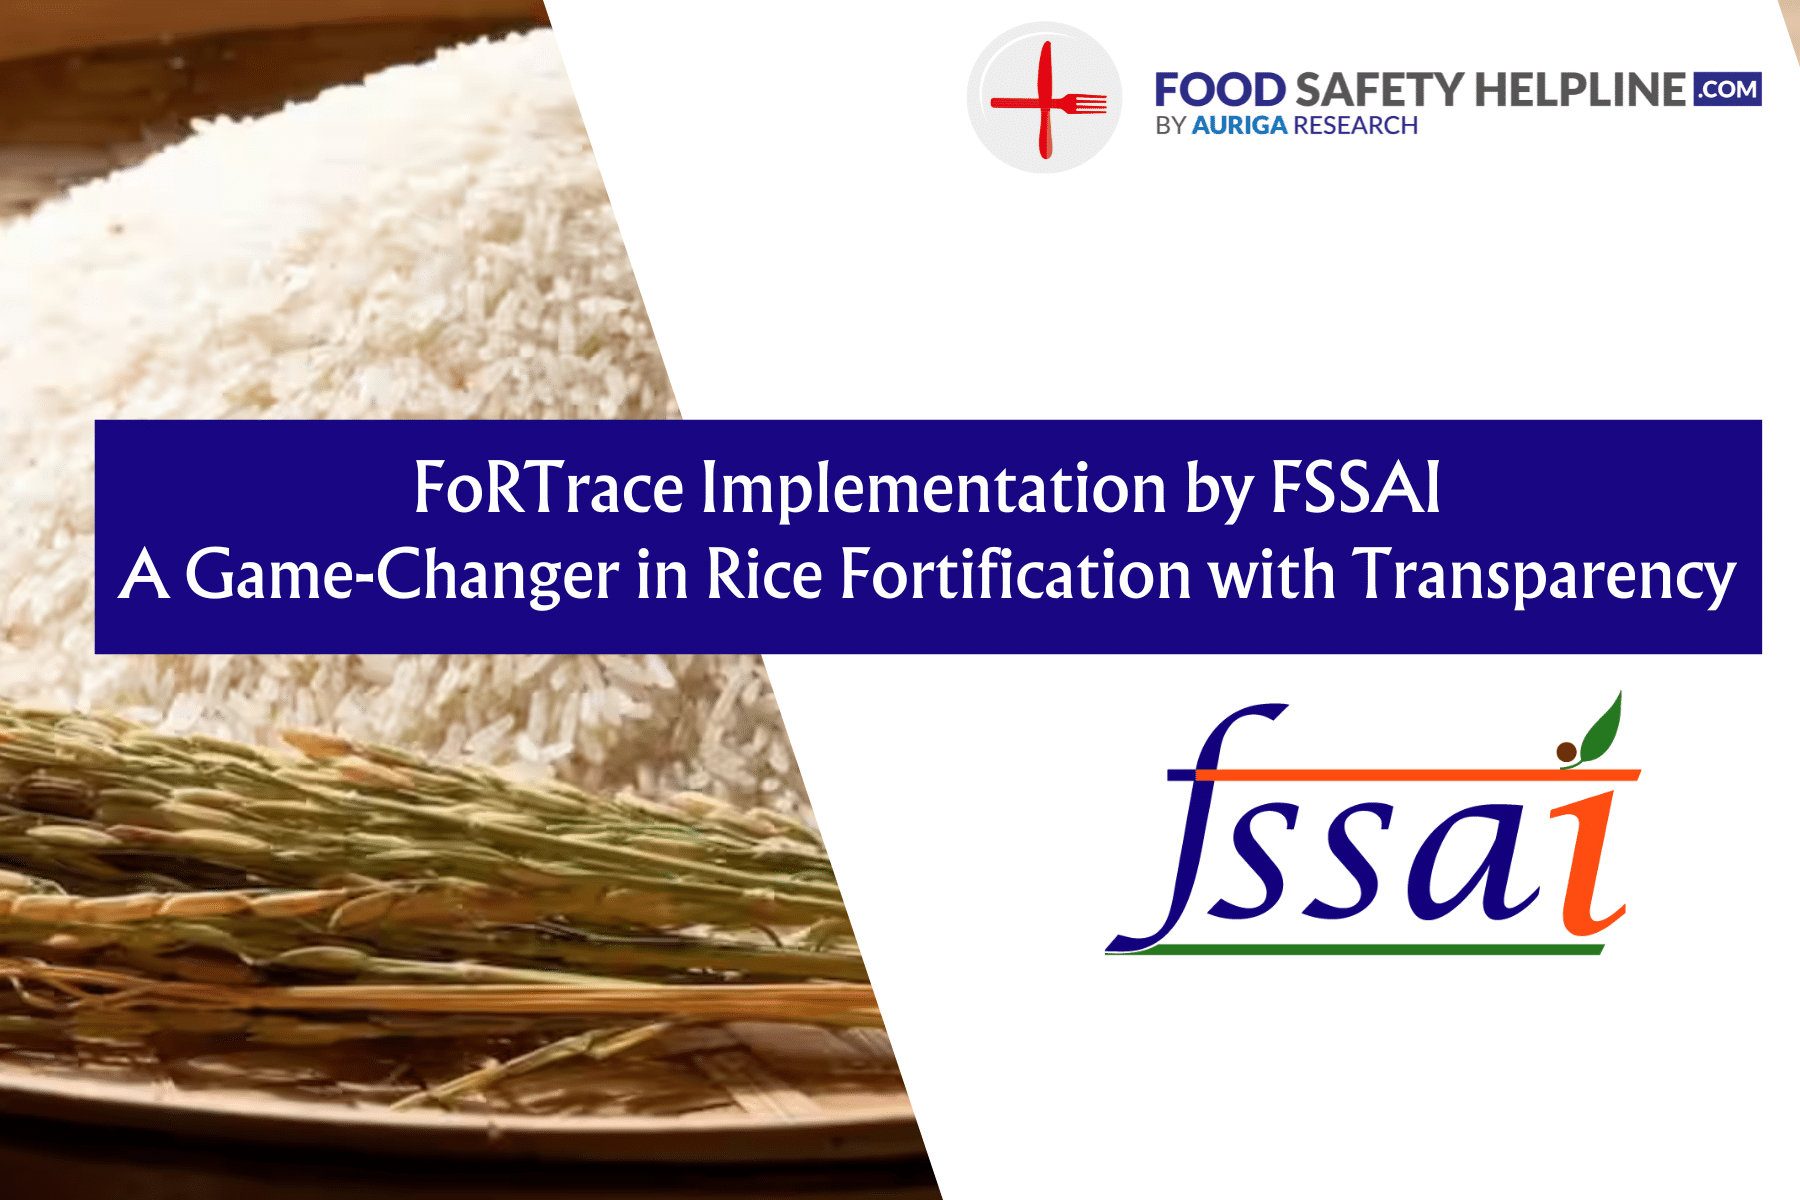 FoRTrace Implementation by FSSAI: A Game-Changer in Rice Fortification with Transparency